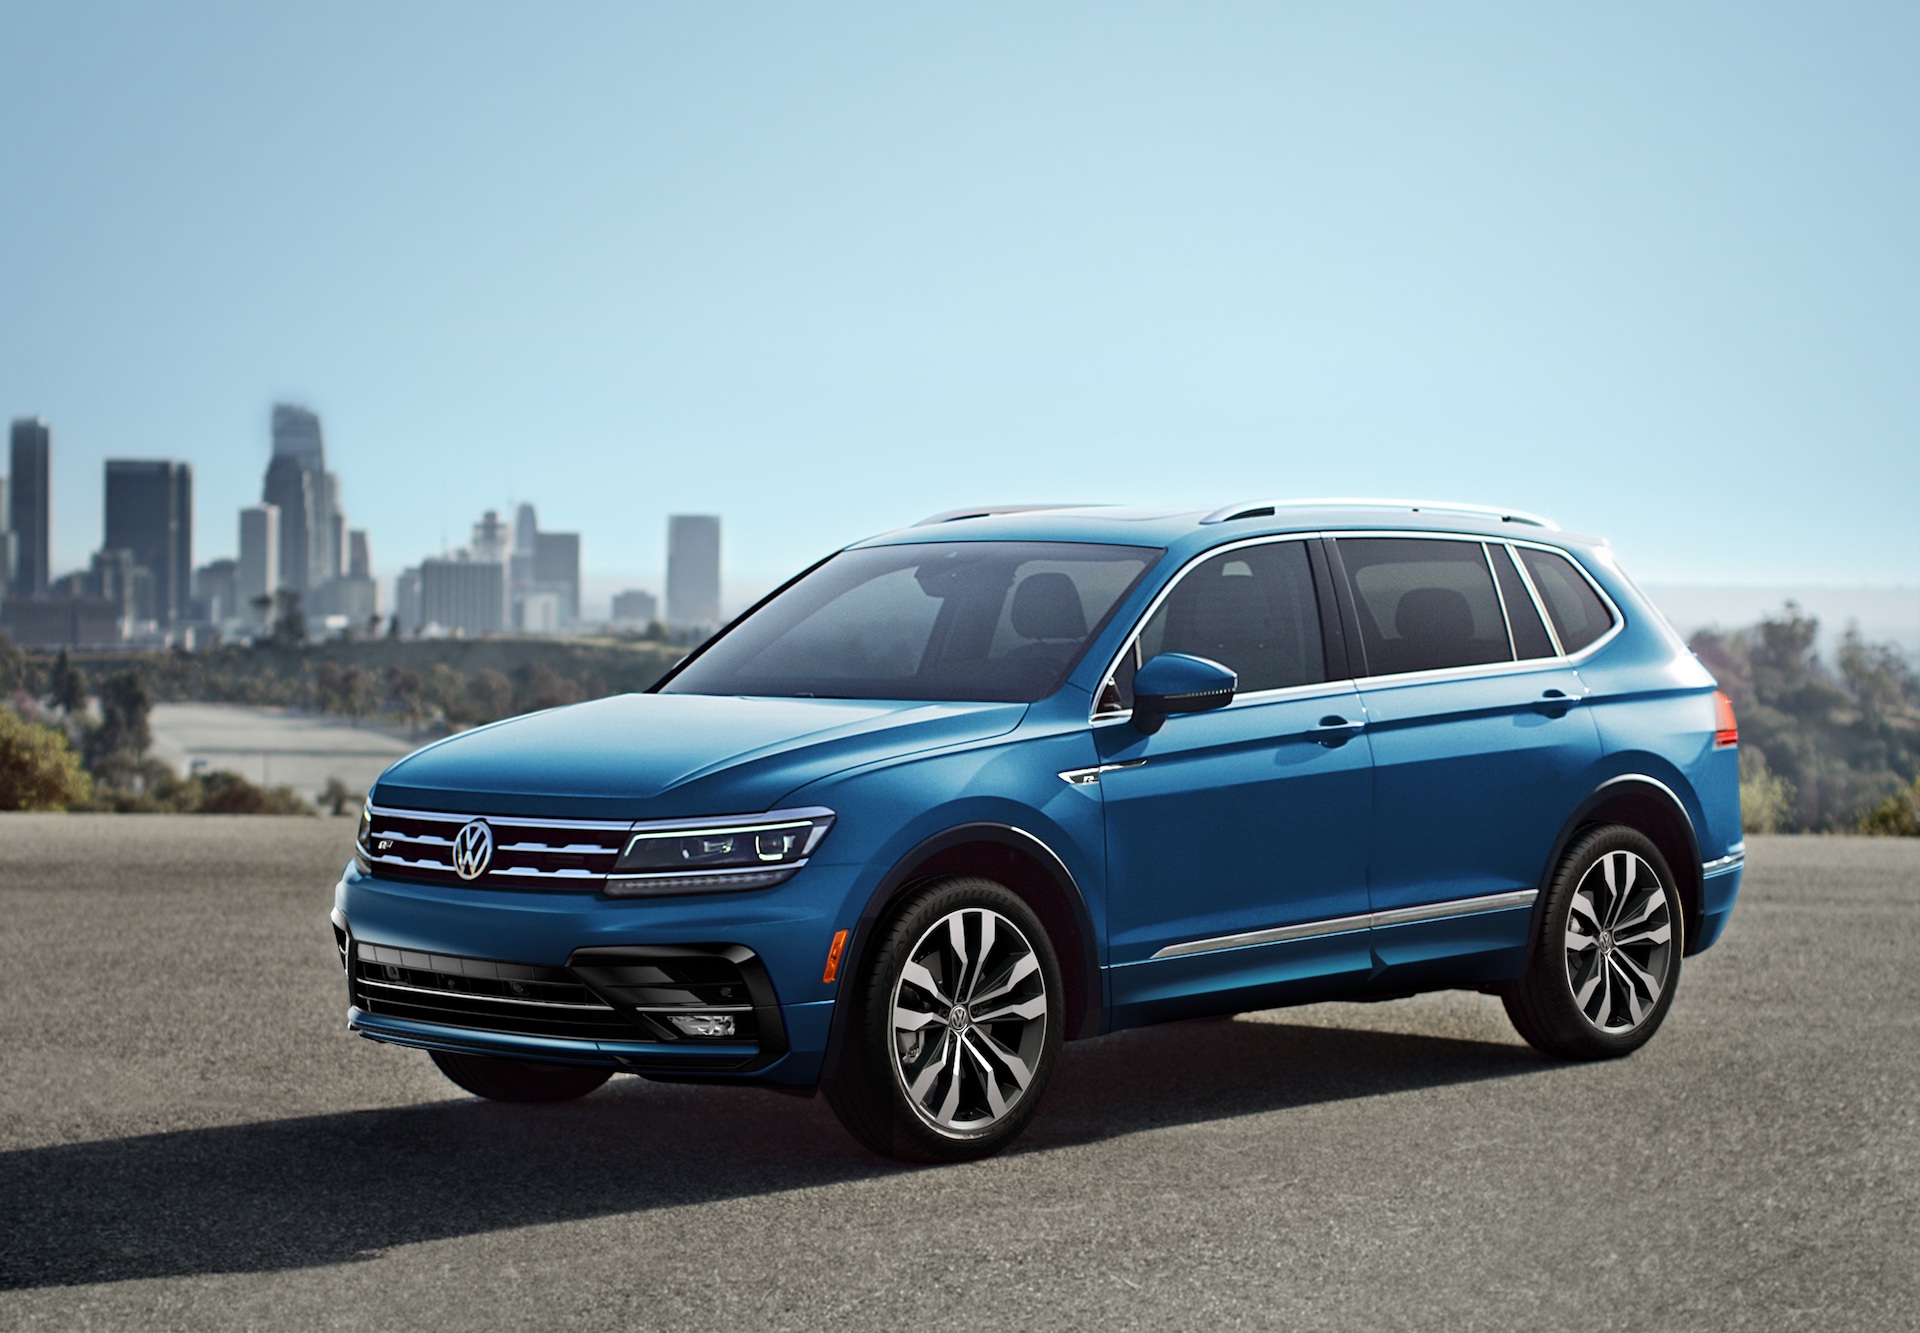 A photo of the 2020 Volkswagen Tiguan outdoors.